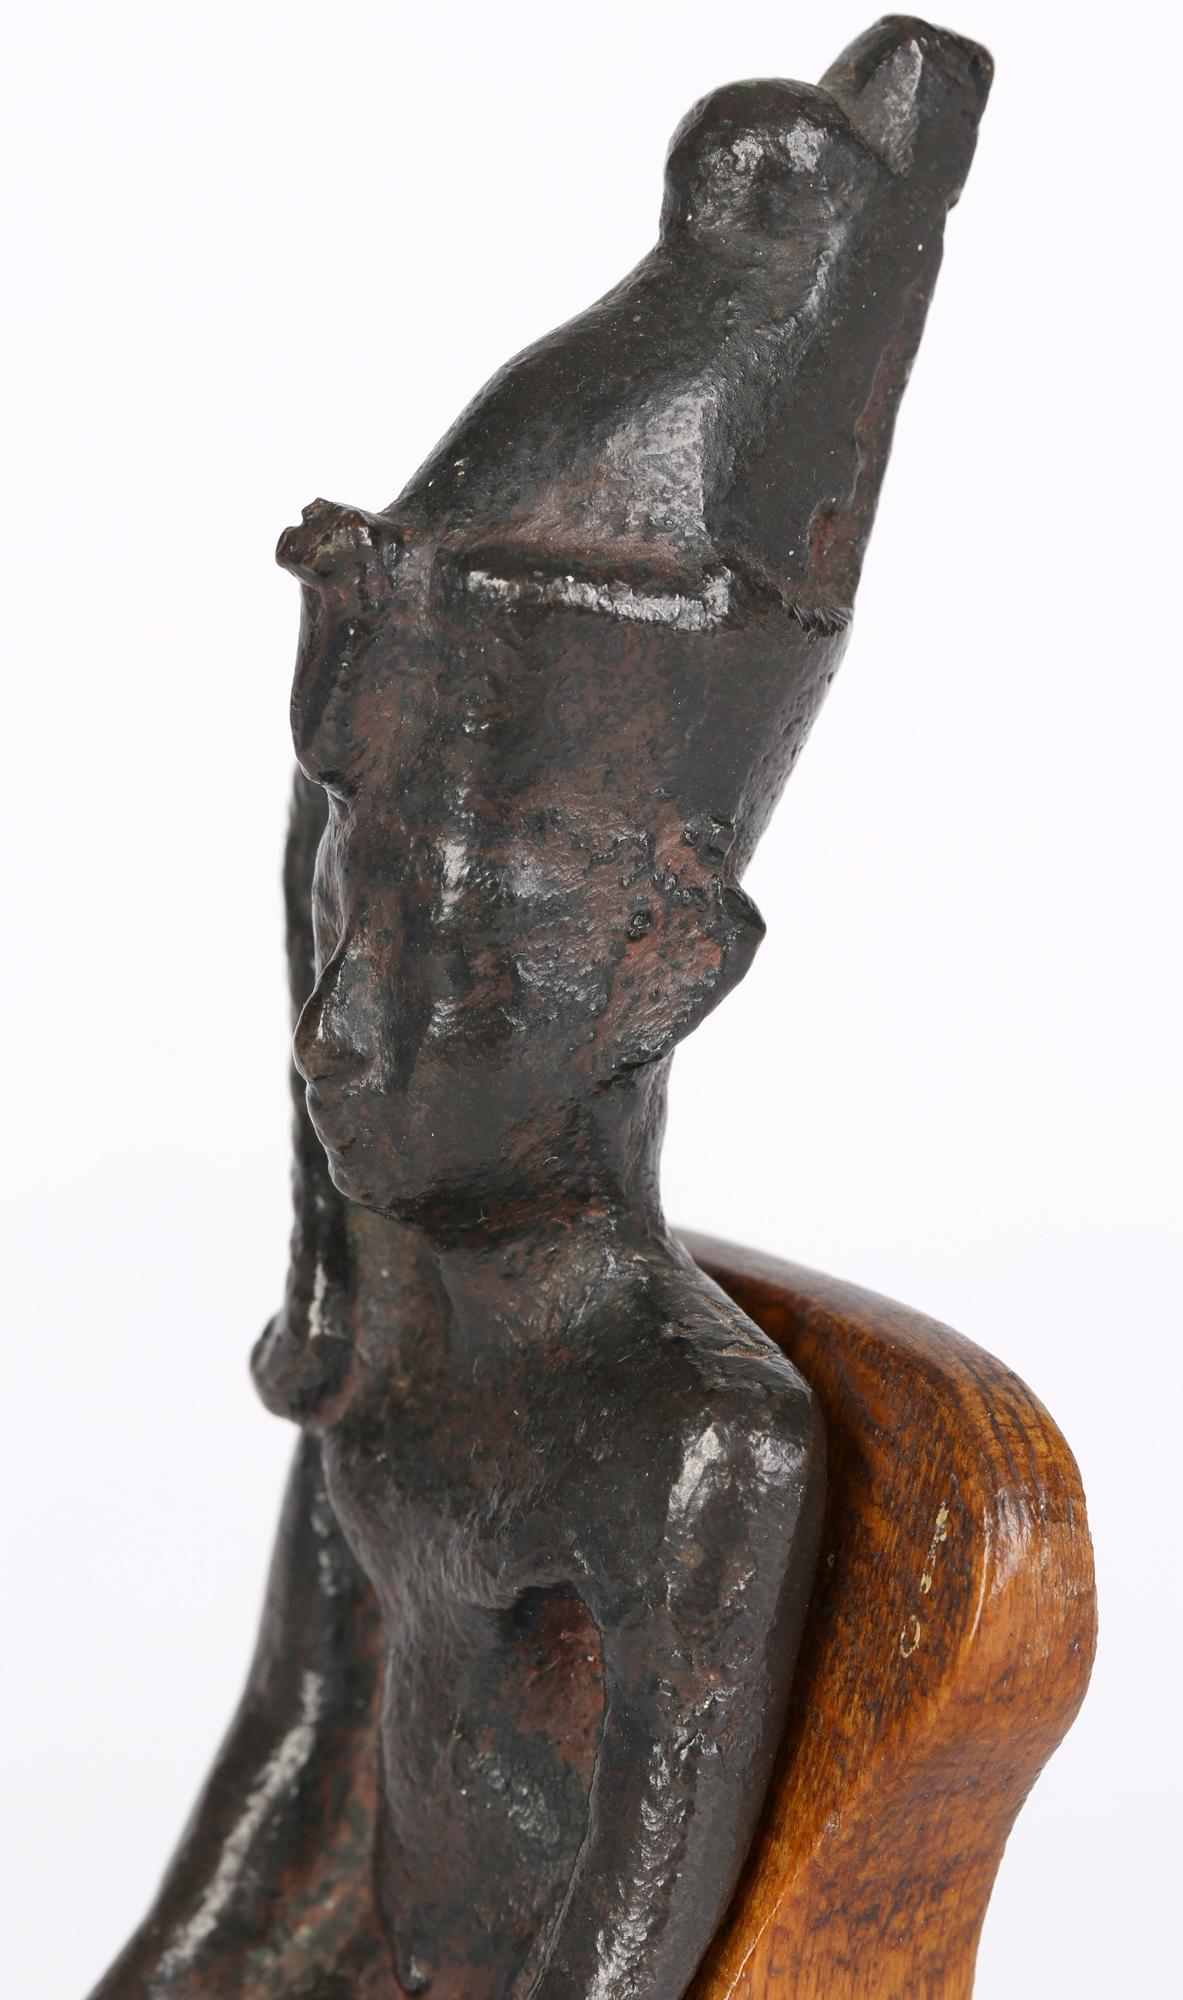 An interesting and unusual Egyptian bronze seated figure portraying the youthful god Harpokrates (Horus the child). The figure sits unclothed with legs bent and both arms resting by his sides. His face is indistinctly molded with a wide nose and